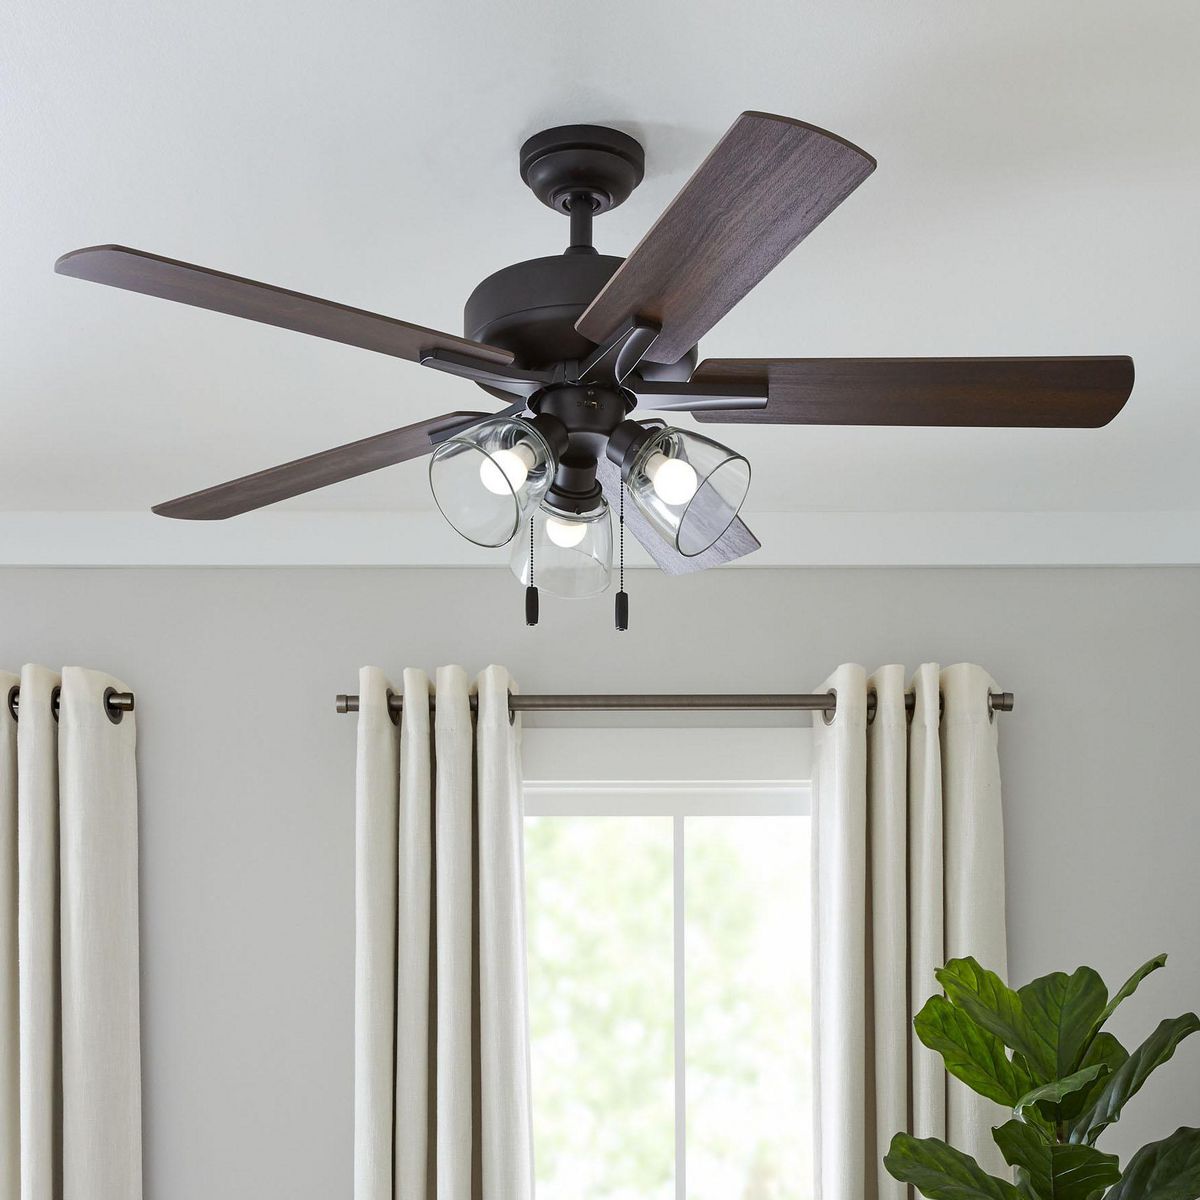 Better Homes & Gardens 52" Bronze Coastal Ceiling Fan, 5 Reversible Blade, 3 LED Bulbs Included - image 2 of 10